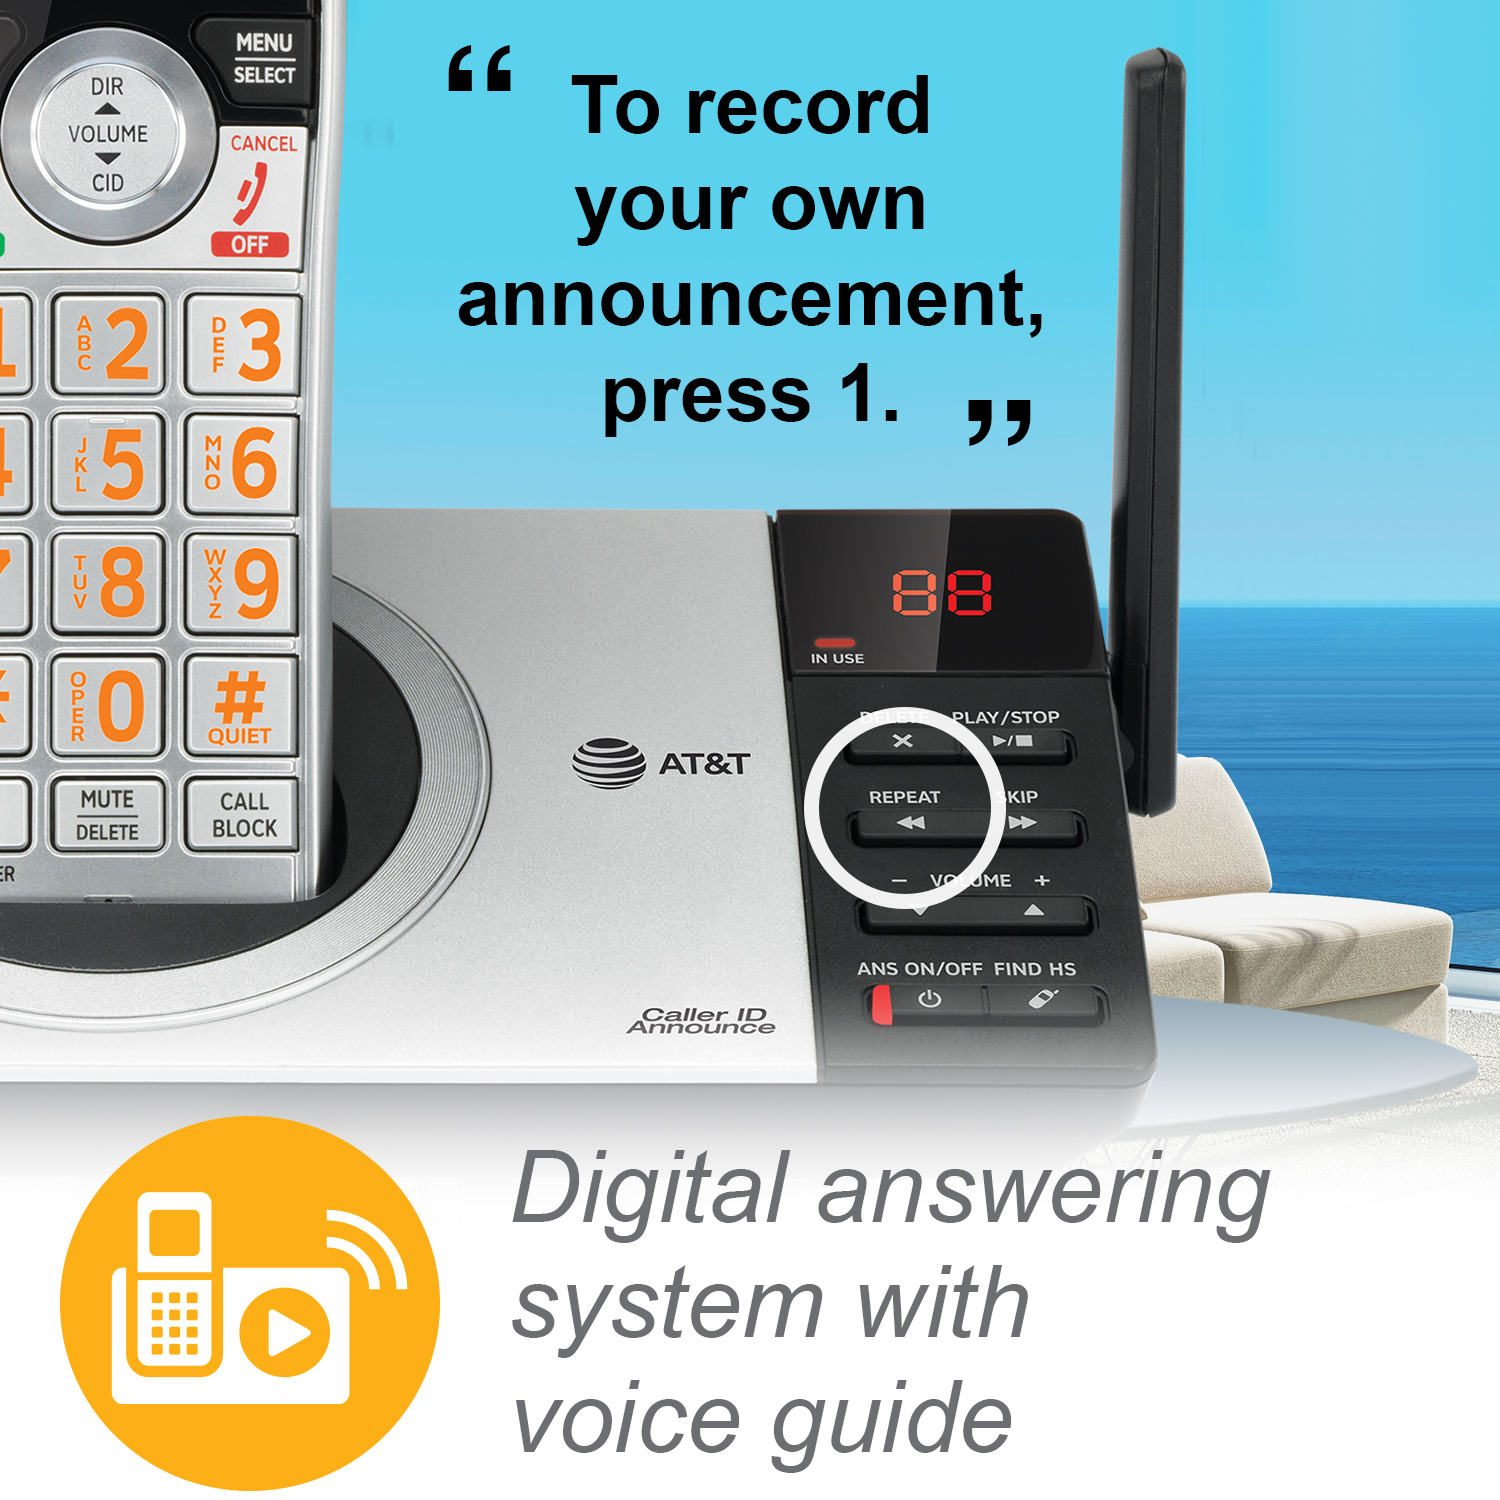 2 handset cordless answering system with smart call blocker - view 8